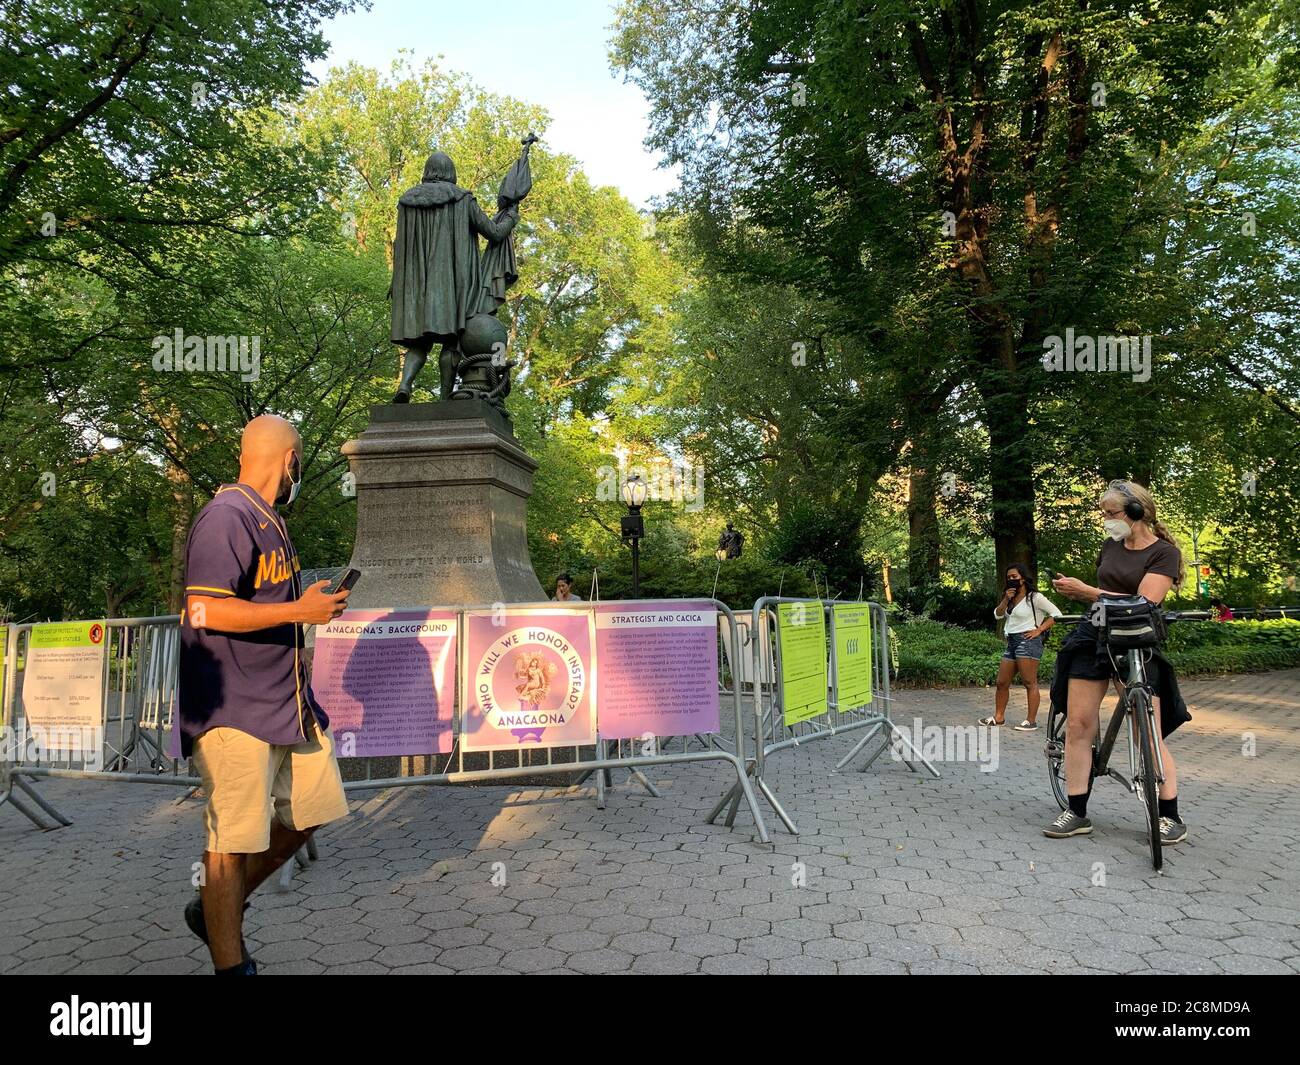 July 25, 2020, New York, USA: (NEW) Protest Ã¢â‚¬Å“Take down Columbus.Ã¢â‚¬Â July 25, 2020, New York, USA: A group of protesters called Ã¢â‚¬Å“Take Down Columbus NYCÃ¢â‚¬Â gathered at Central Park to demand the taking down of Christopher ColumbusÃ¢â‚¬â„¢ statue which has been under protection of NYPD policemen for some time now . The statue is also barricaded with fences to prevent its destruction by protesters. The protesters demand instead the Columbus replacement with ANACAONA, who was a composer of ballads, narrative poems and traditional dances called AREITOS and who was captured and la Stock Photo